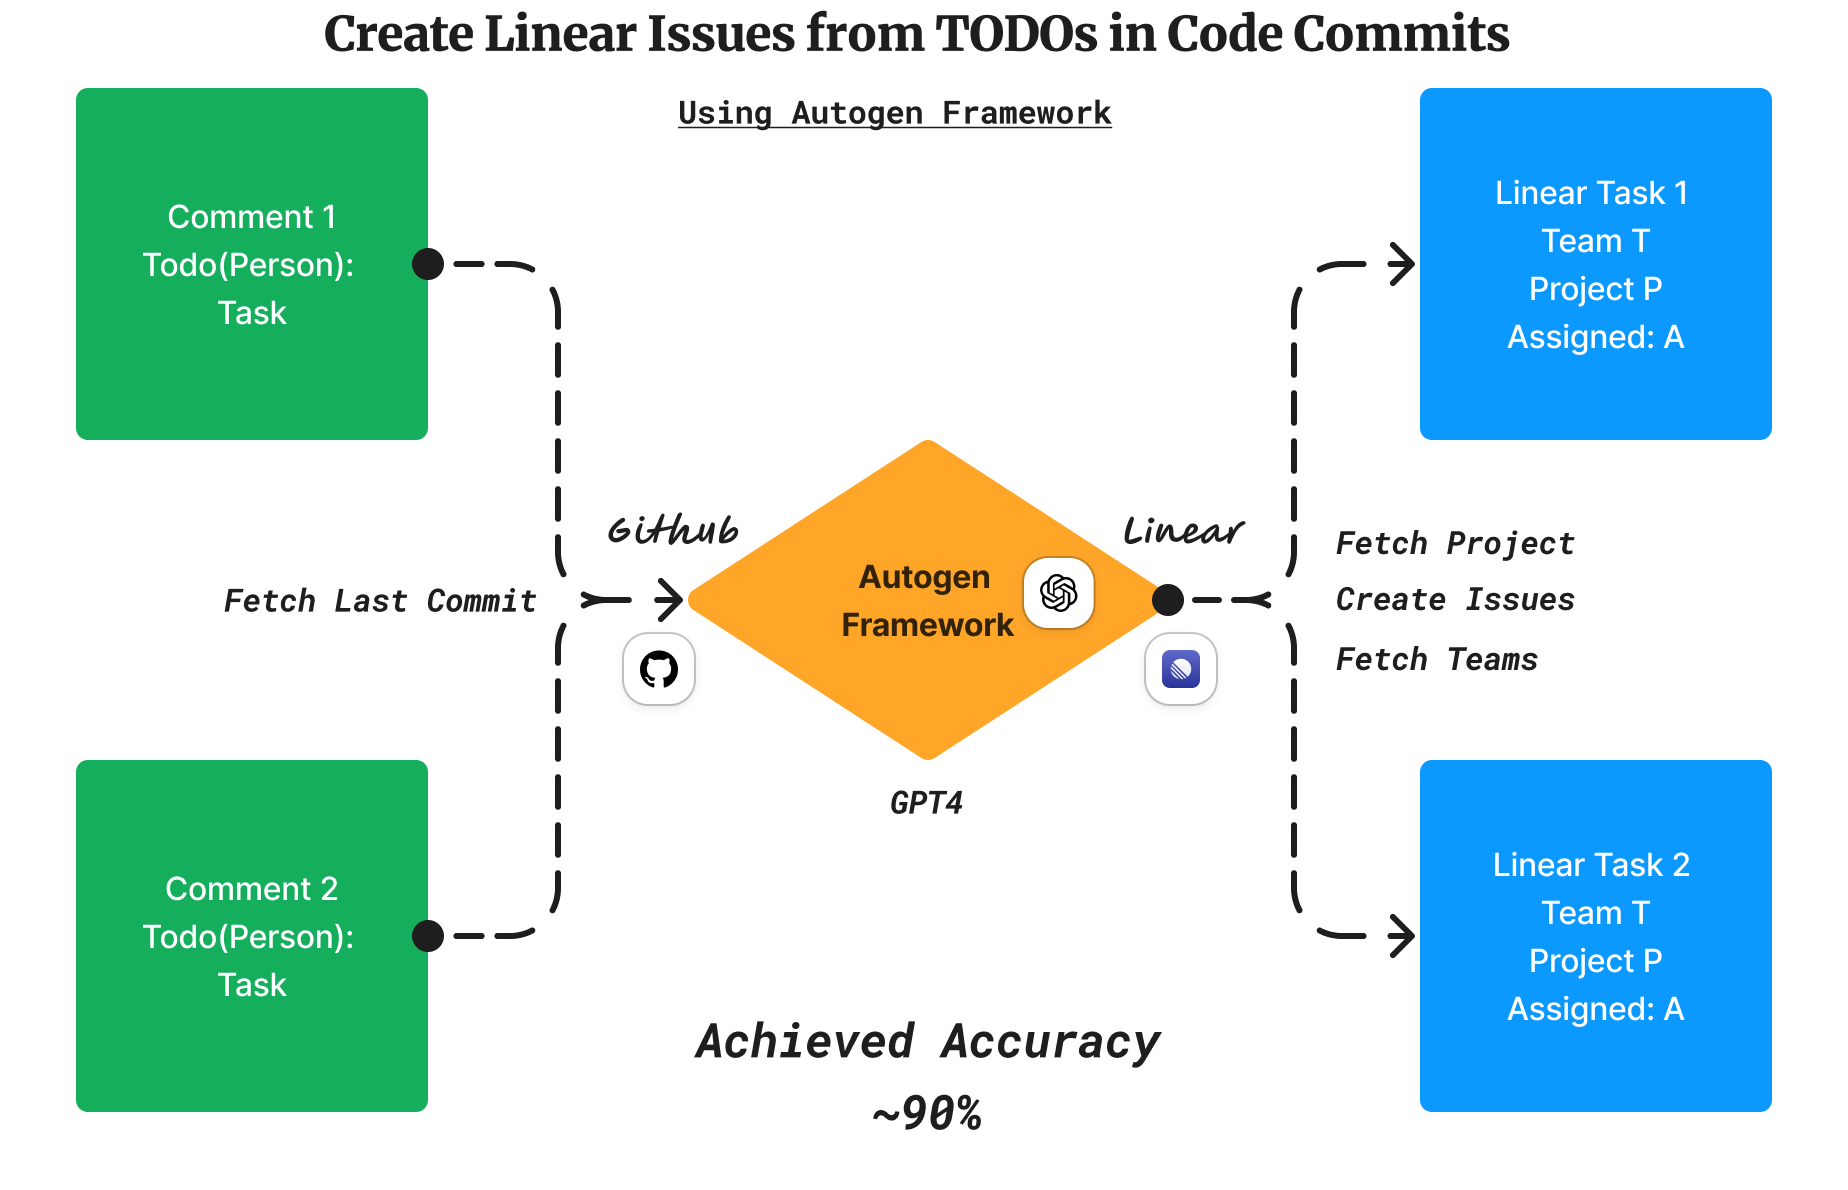 Create Issues from Code Commits - using Autogen